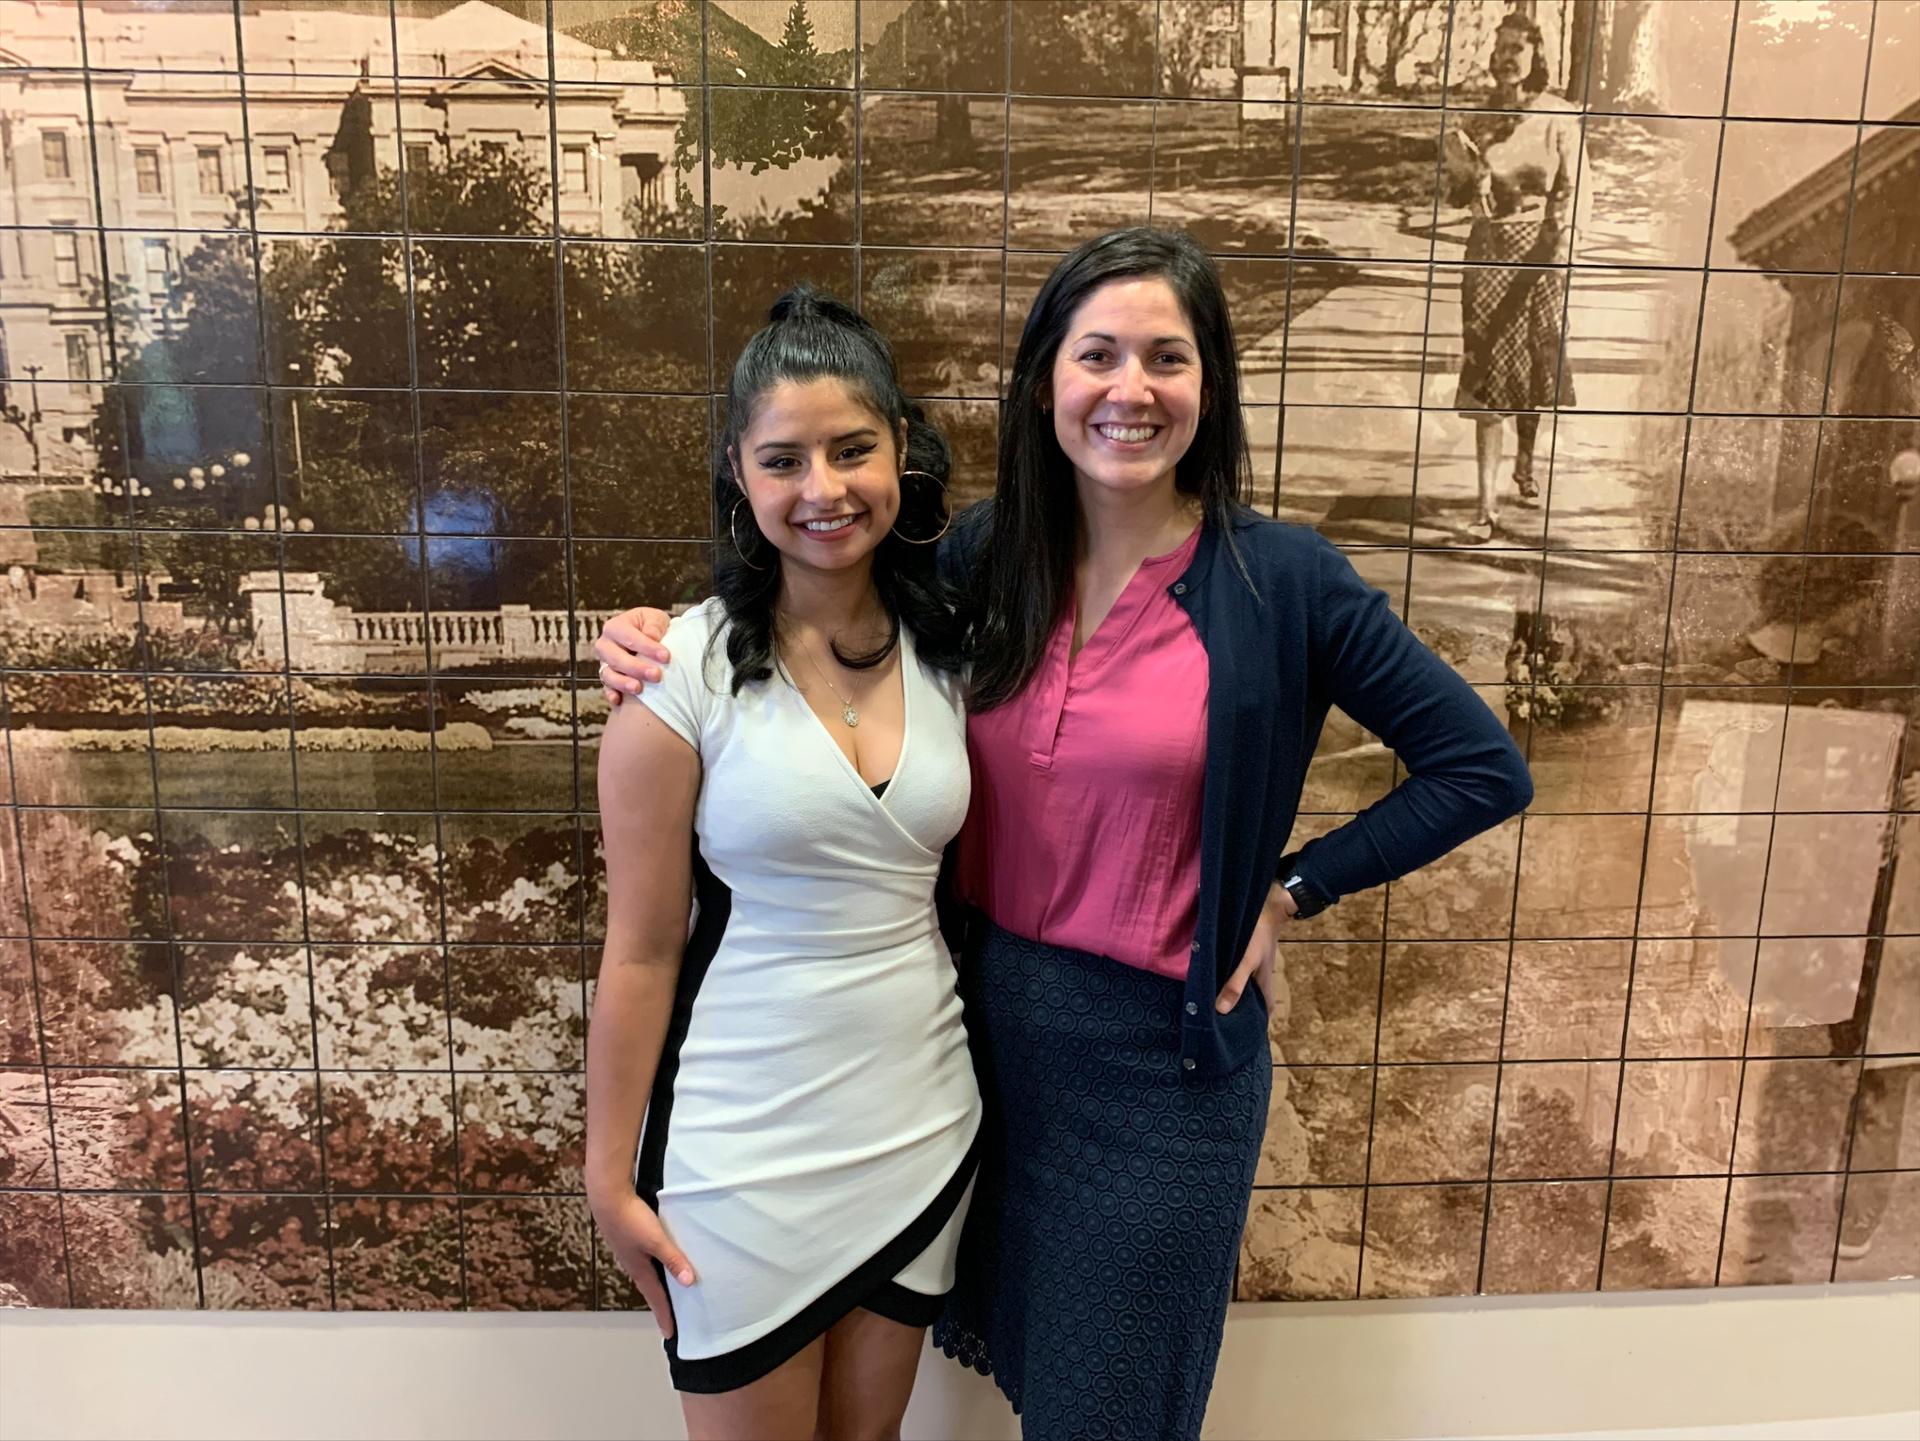 Immigration Defense Clinic students Larrisa Alire and Marina Fleming, in their second year at law school at the University of Colorado, provide free legal services to immigrants.